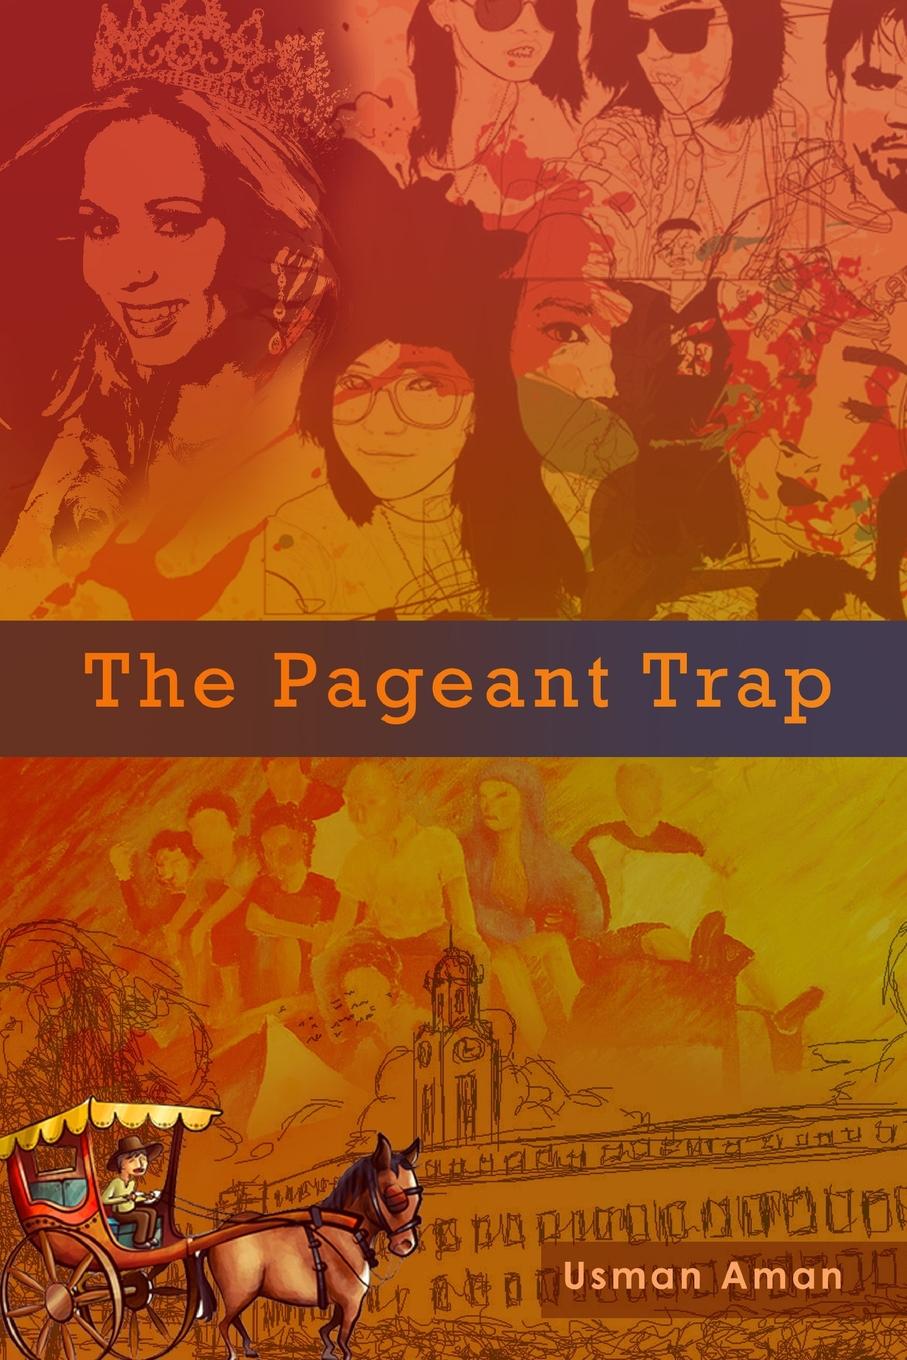 The Pageant Trap